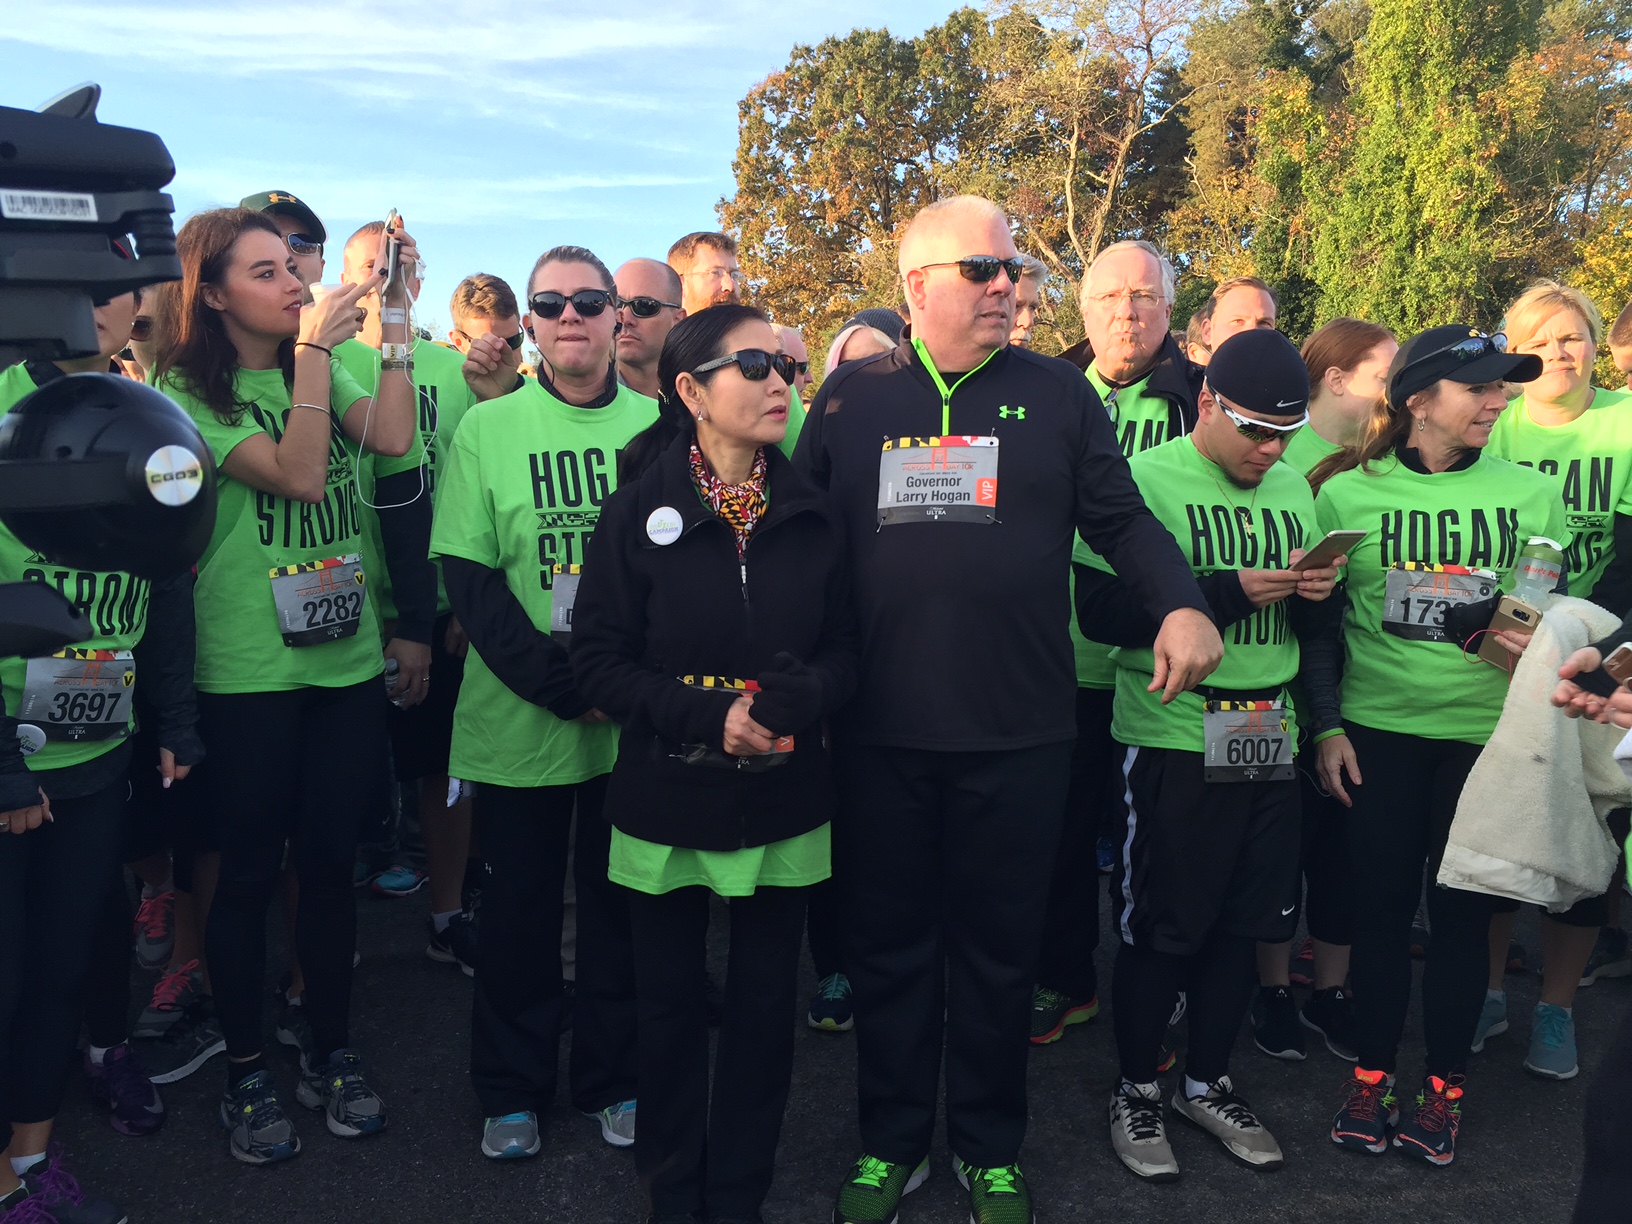 Maryland Gov. Larry Hogan was among 20,000 runners who participated in the Across the Bay 10K Sunday, Nov. 6, 2016. (WTOP/Dennis Foley)